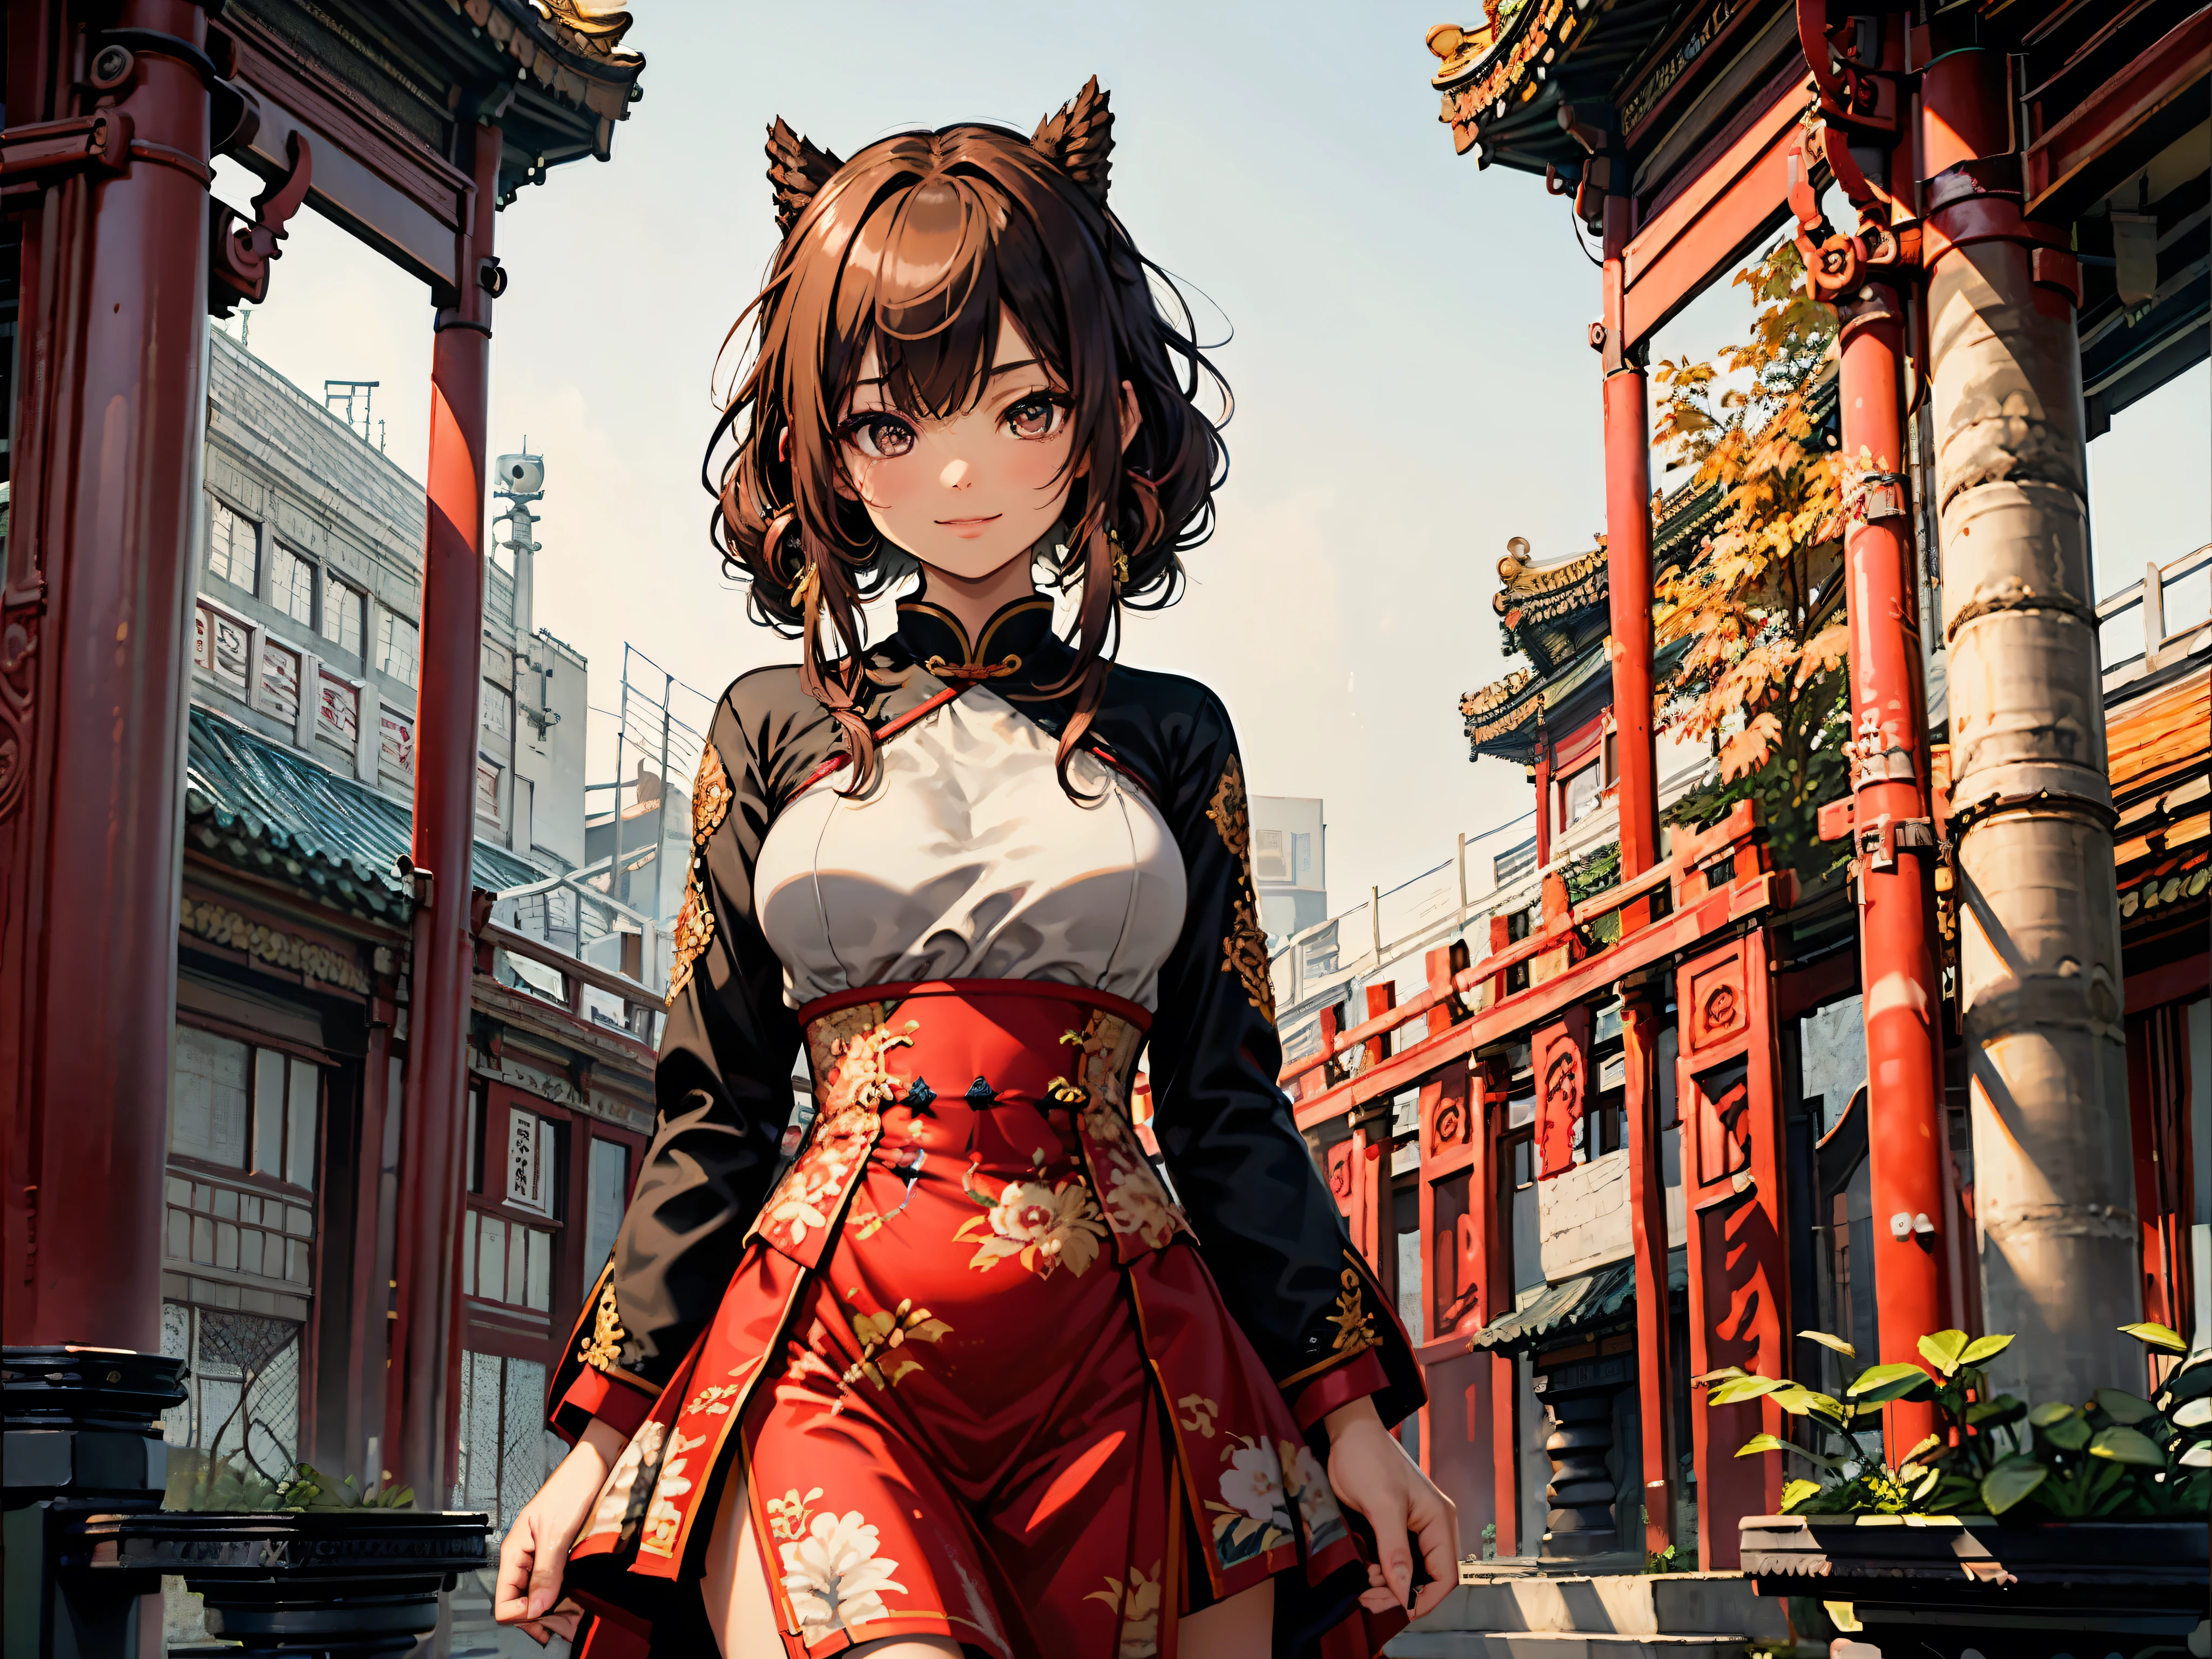 quality\(8k,wallpaper of extremely detailed CG unit, ​masterpiece,hight resolution,top-quality,top-quality real texture skin,hyper realisitic,increase the resolution,RAW photos,best qualtiy,highly detailed,the wallpaper,cinematic lighting,ray trace,golden ratio\), BREAK ,solo,1woman\(cute,kawaii,small kid,smile,hair floating,hair color dark red,long braid hair,eye color dark red,big eyes,beautiful cheongsam,(breast:1.3),fighting stance\(kungfu style\),dynamic angle,long shot,full body,stanping ground\),background\(outside,chinese temple\),long shot